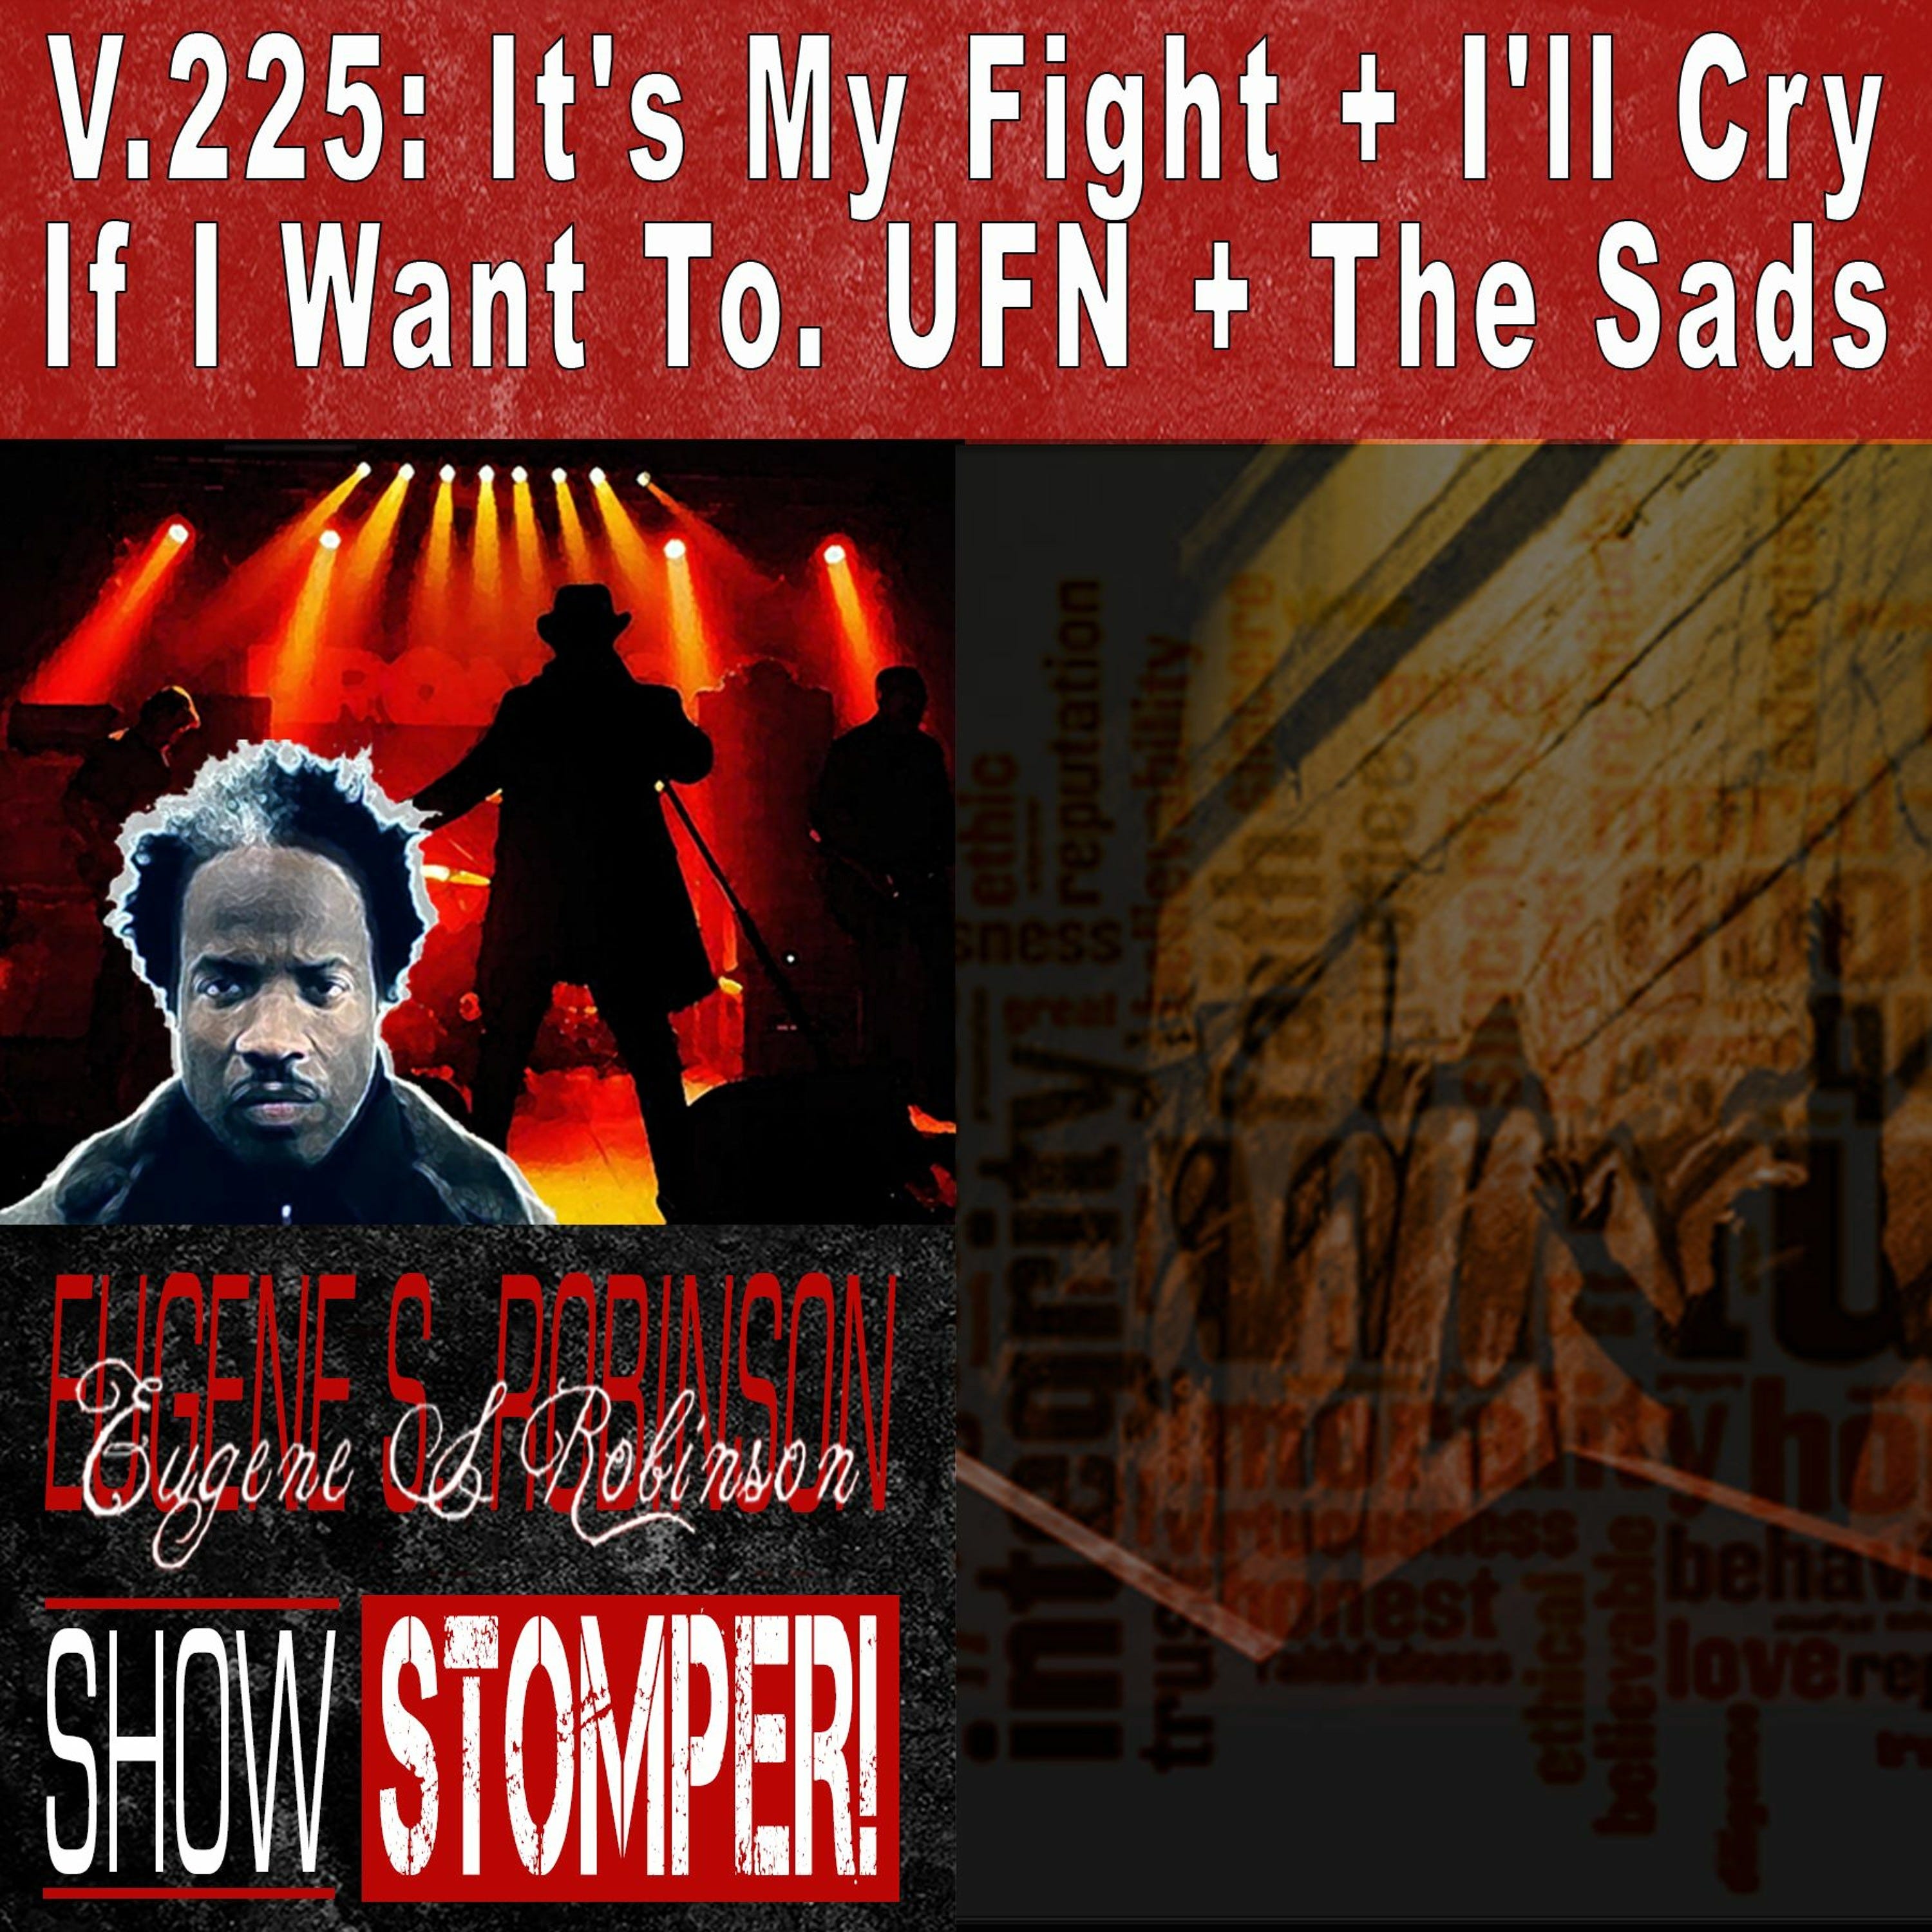 V.225: It's My Fight + I'll Cry If I Want To. UFN + The Sads On The Eugene S. Robinson Show Stomper!